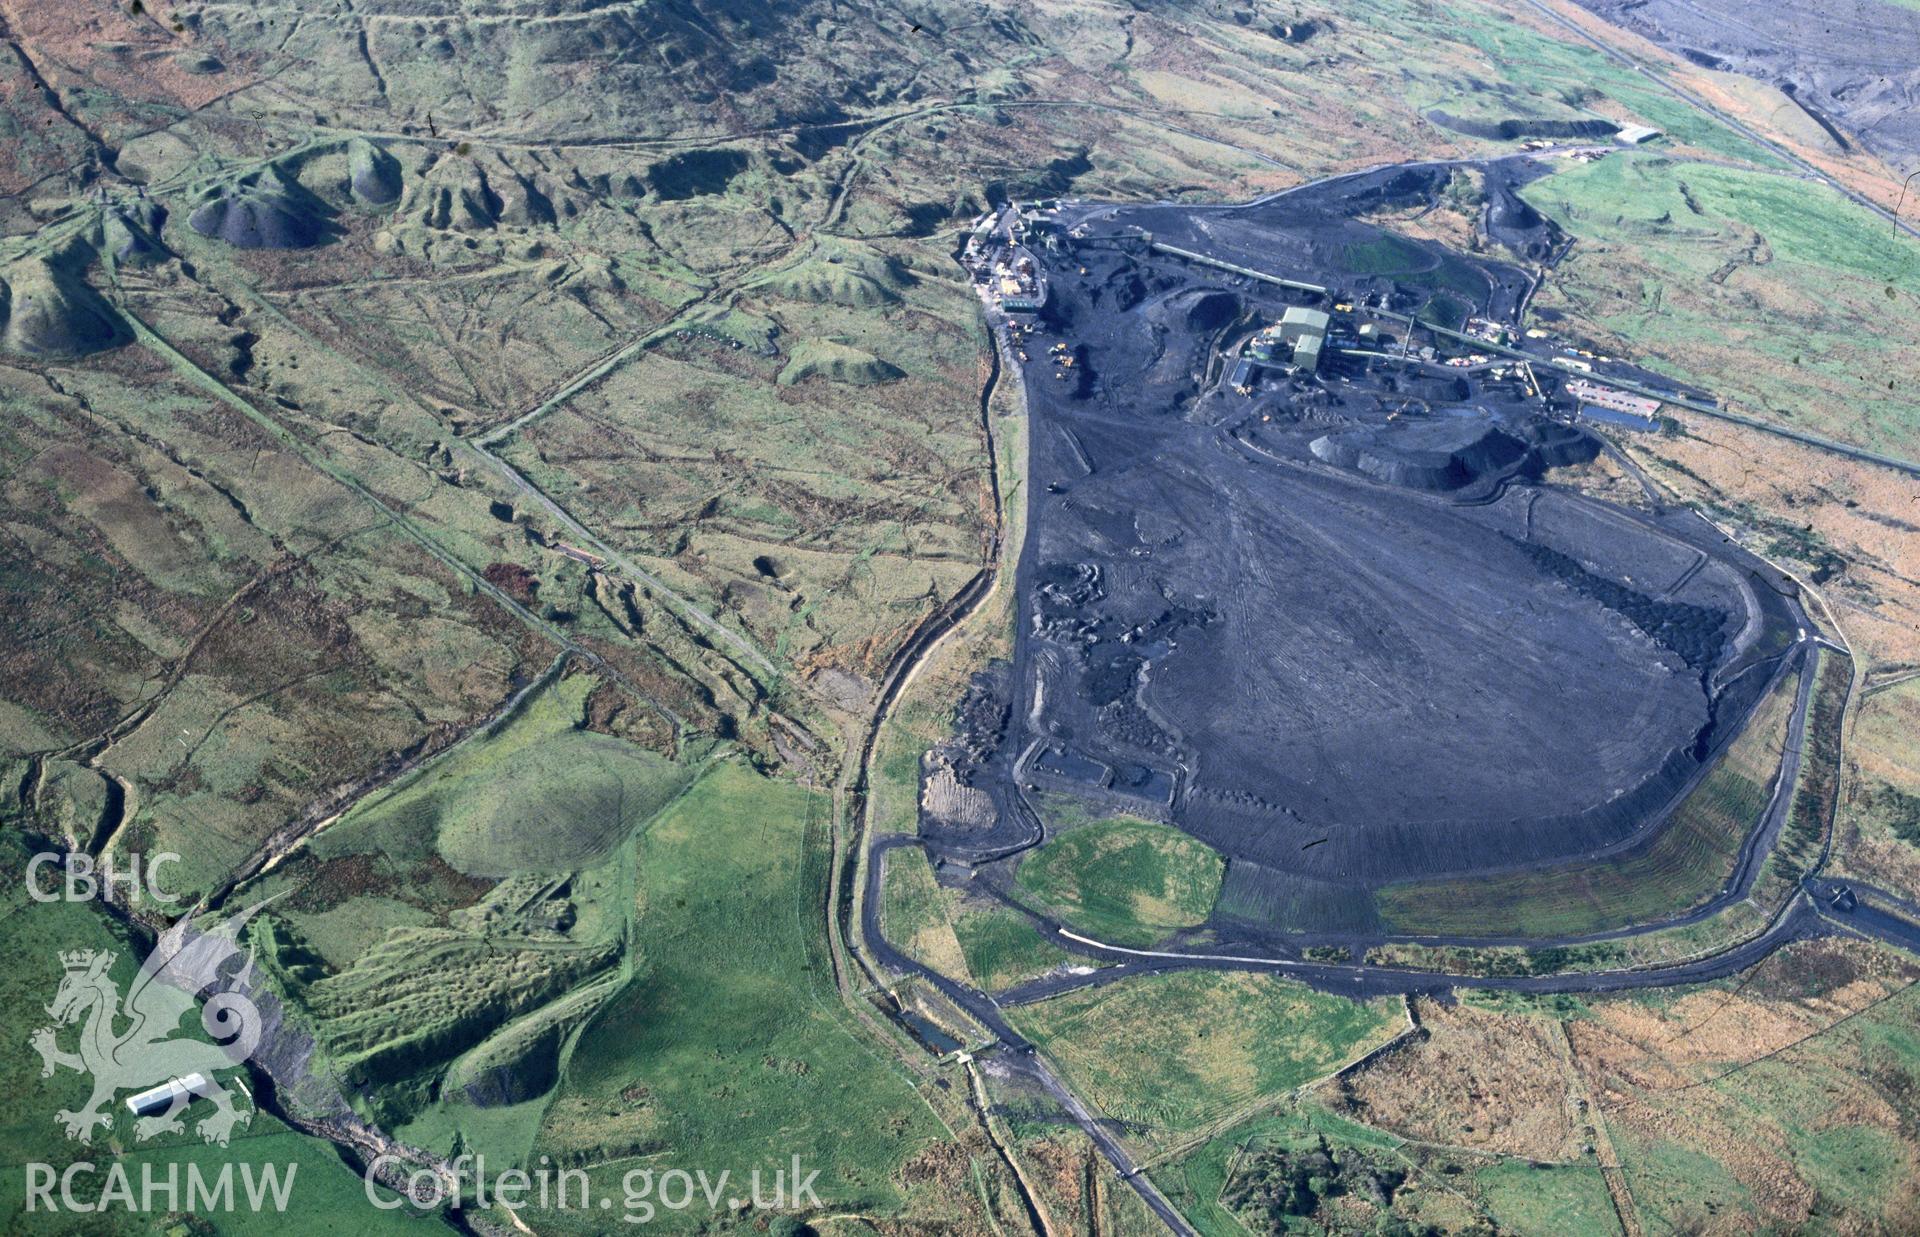 Slide of RCAHMW colour oblique aerial photograph of Tower Drift Mine, Hirwaun, taken by C.R. Musson, 17/10/1992.